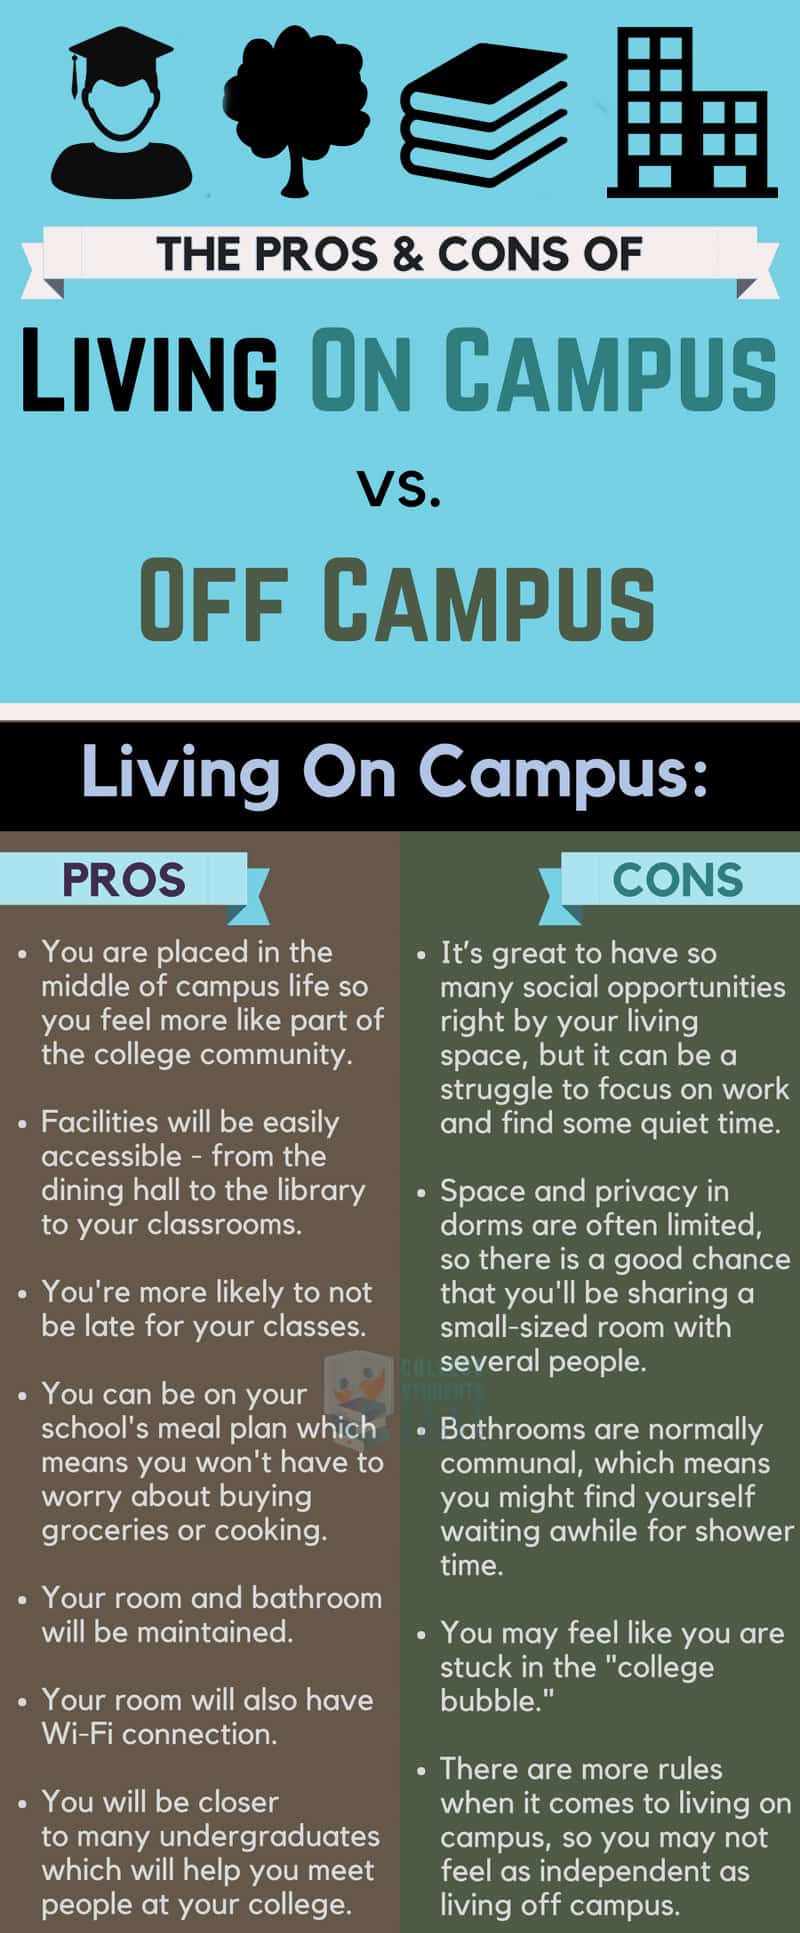 The Pros And Cons Of Studying At Your On-Campus Apartment - Infographic